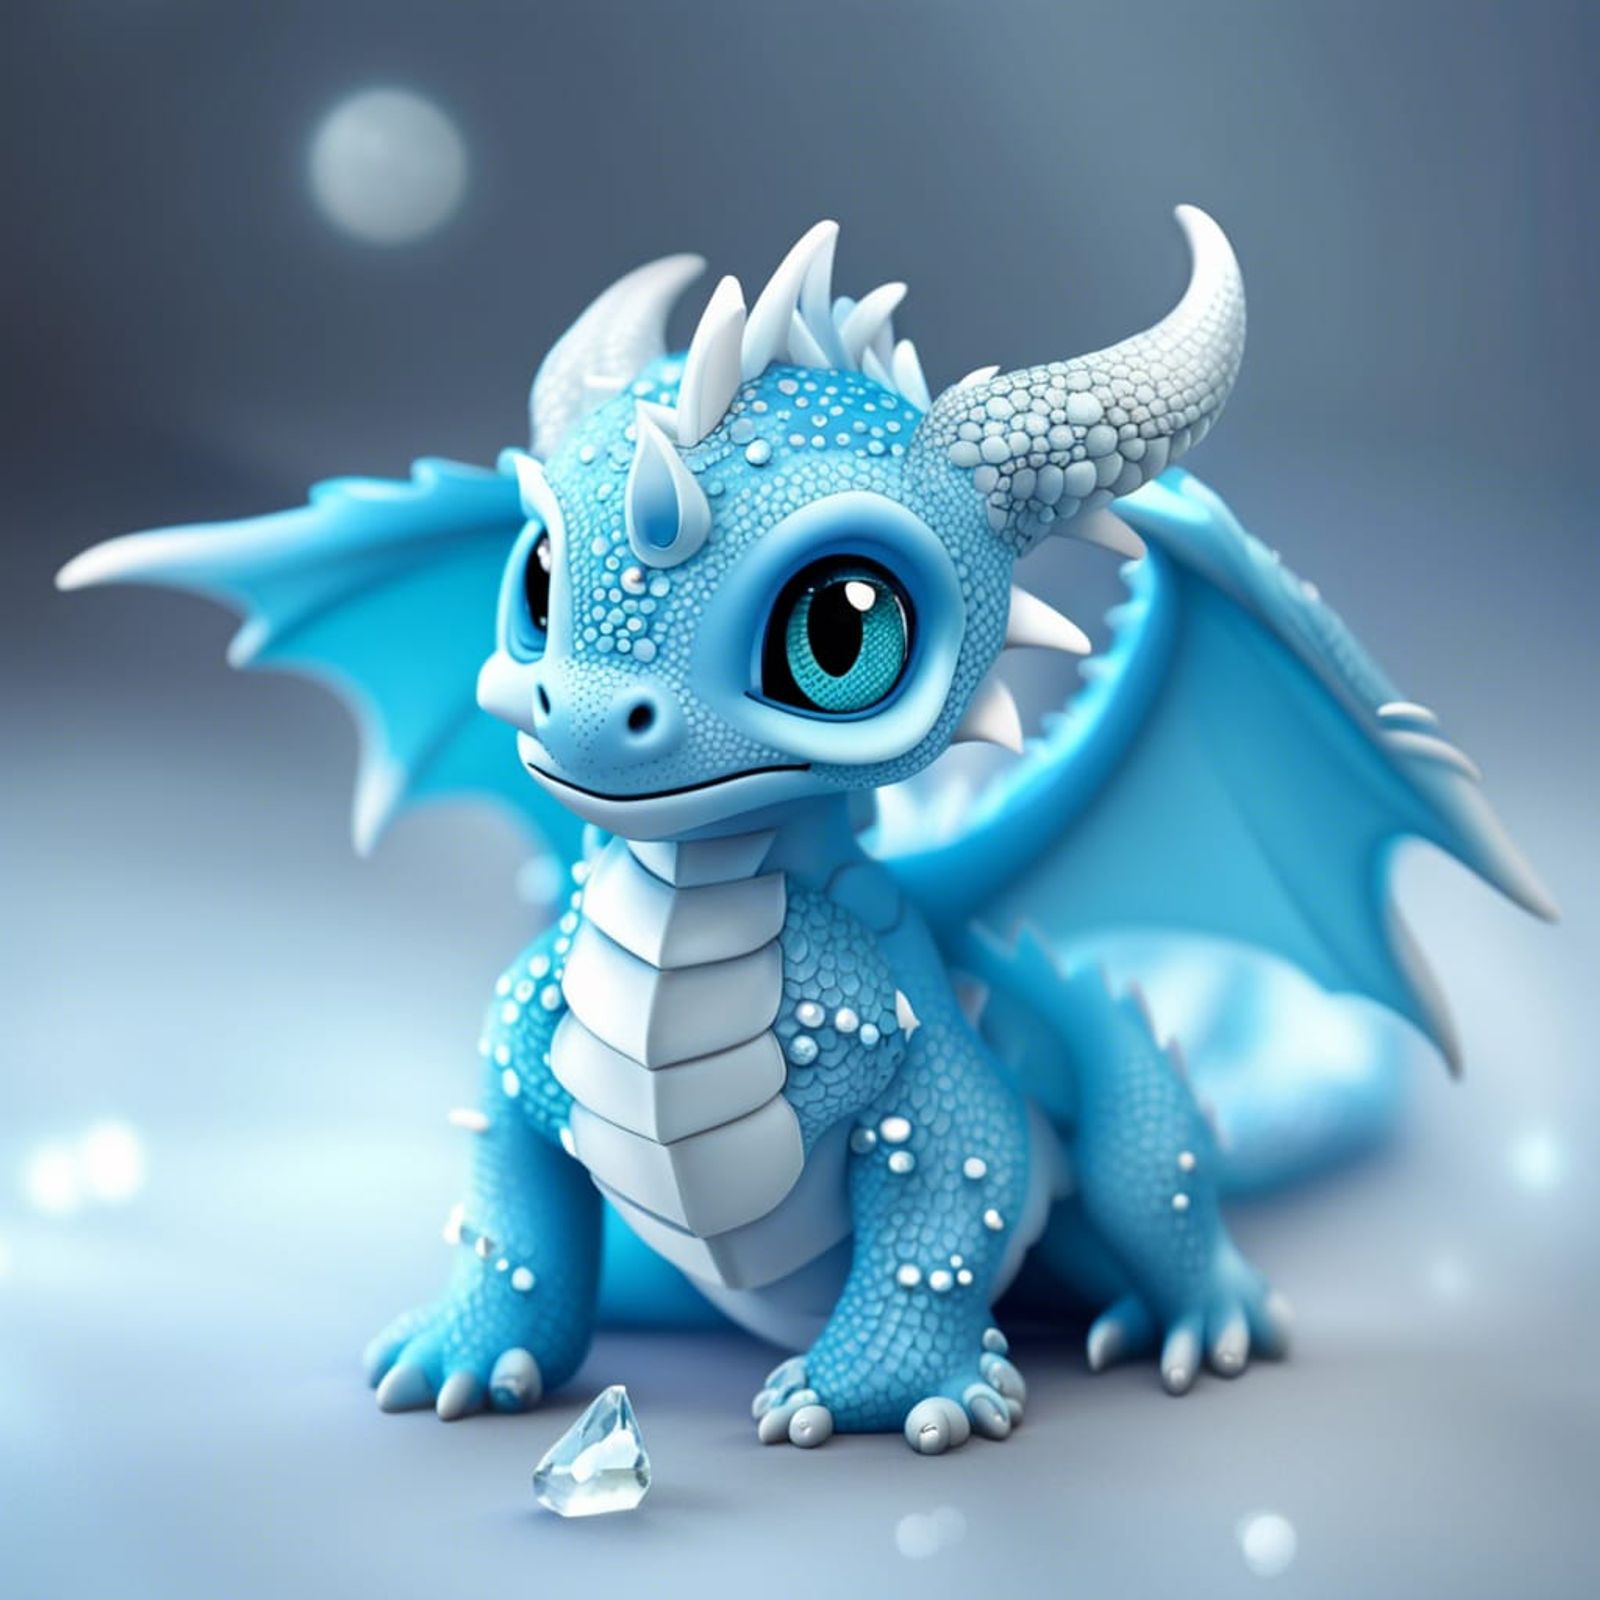 baby dragon pictures